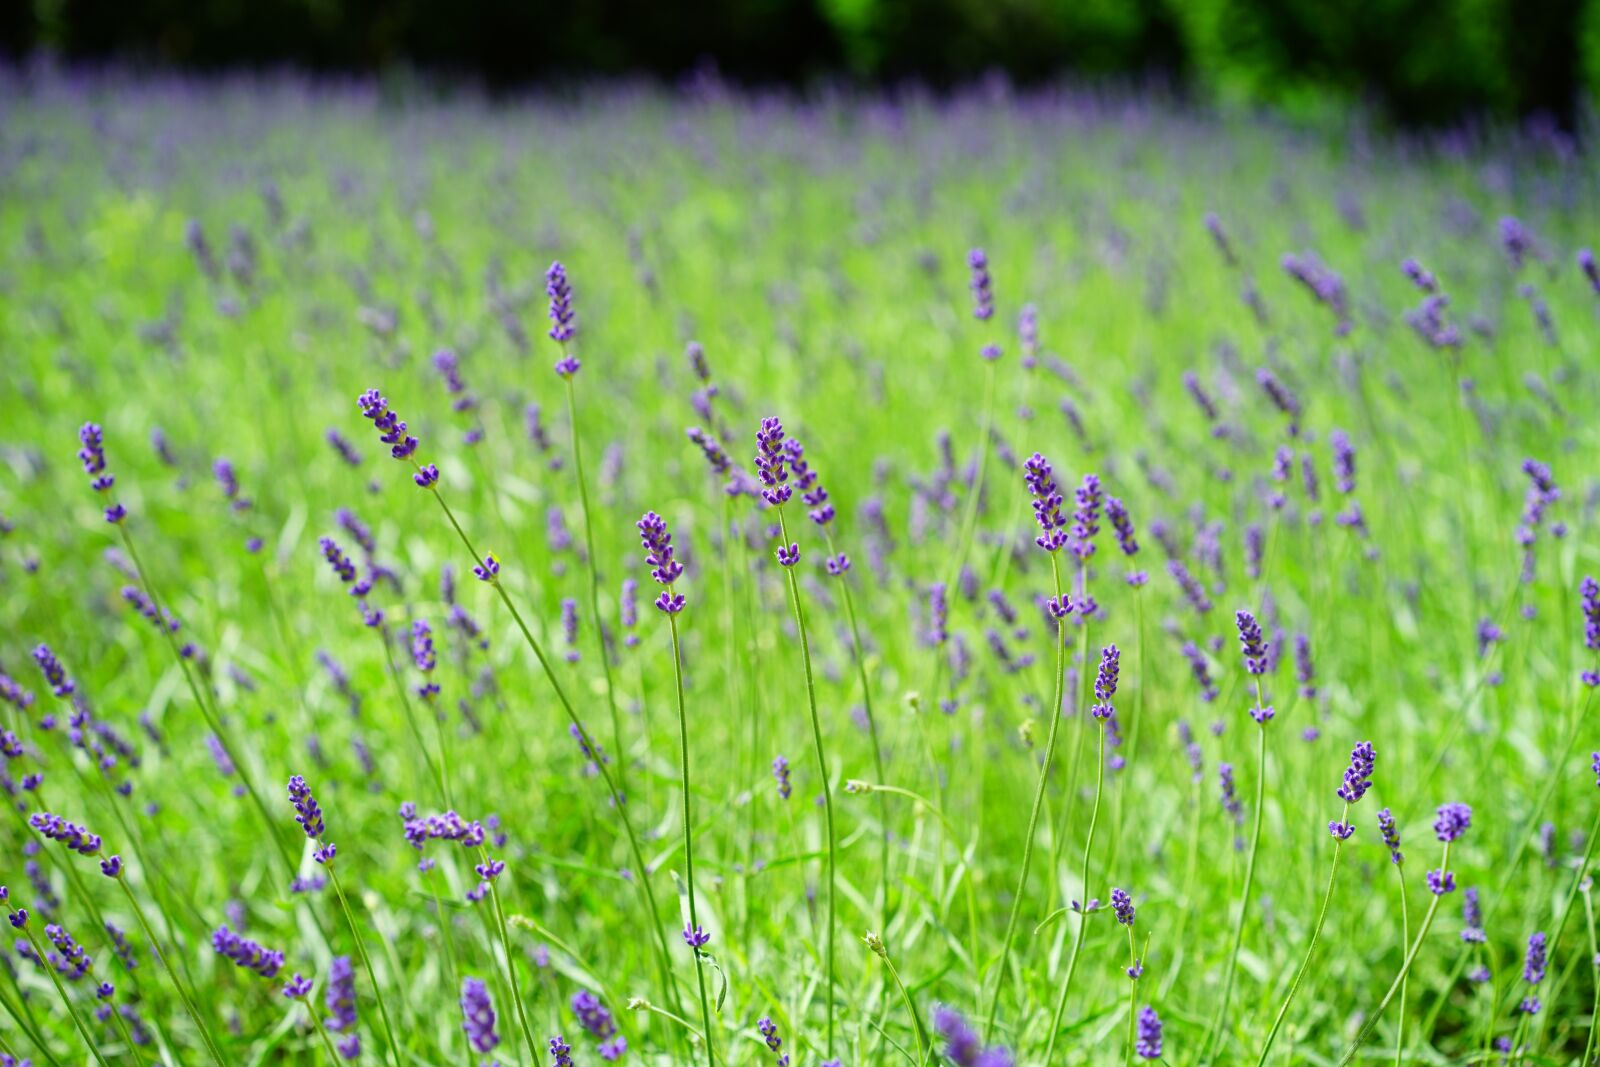 Sony a7 sample photo. Lavender, lavender field, flowers photography